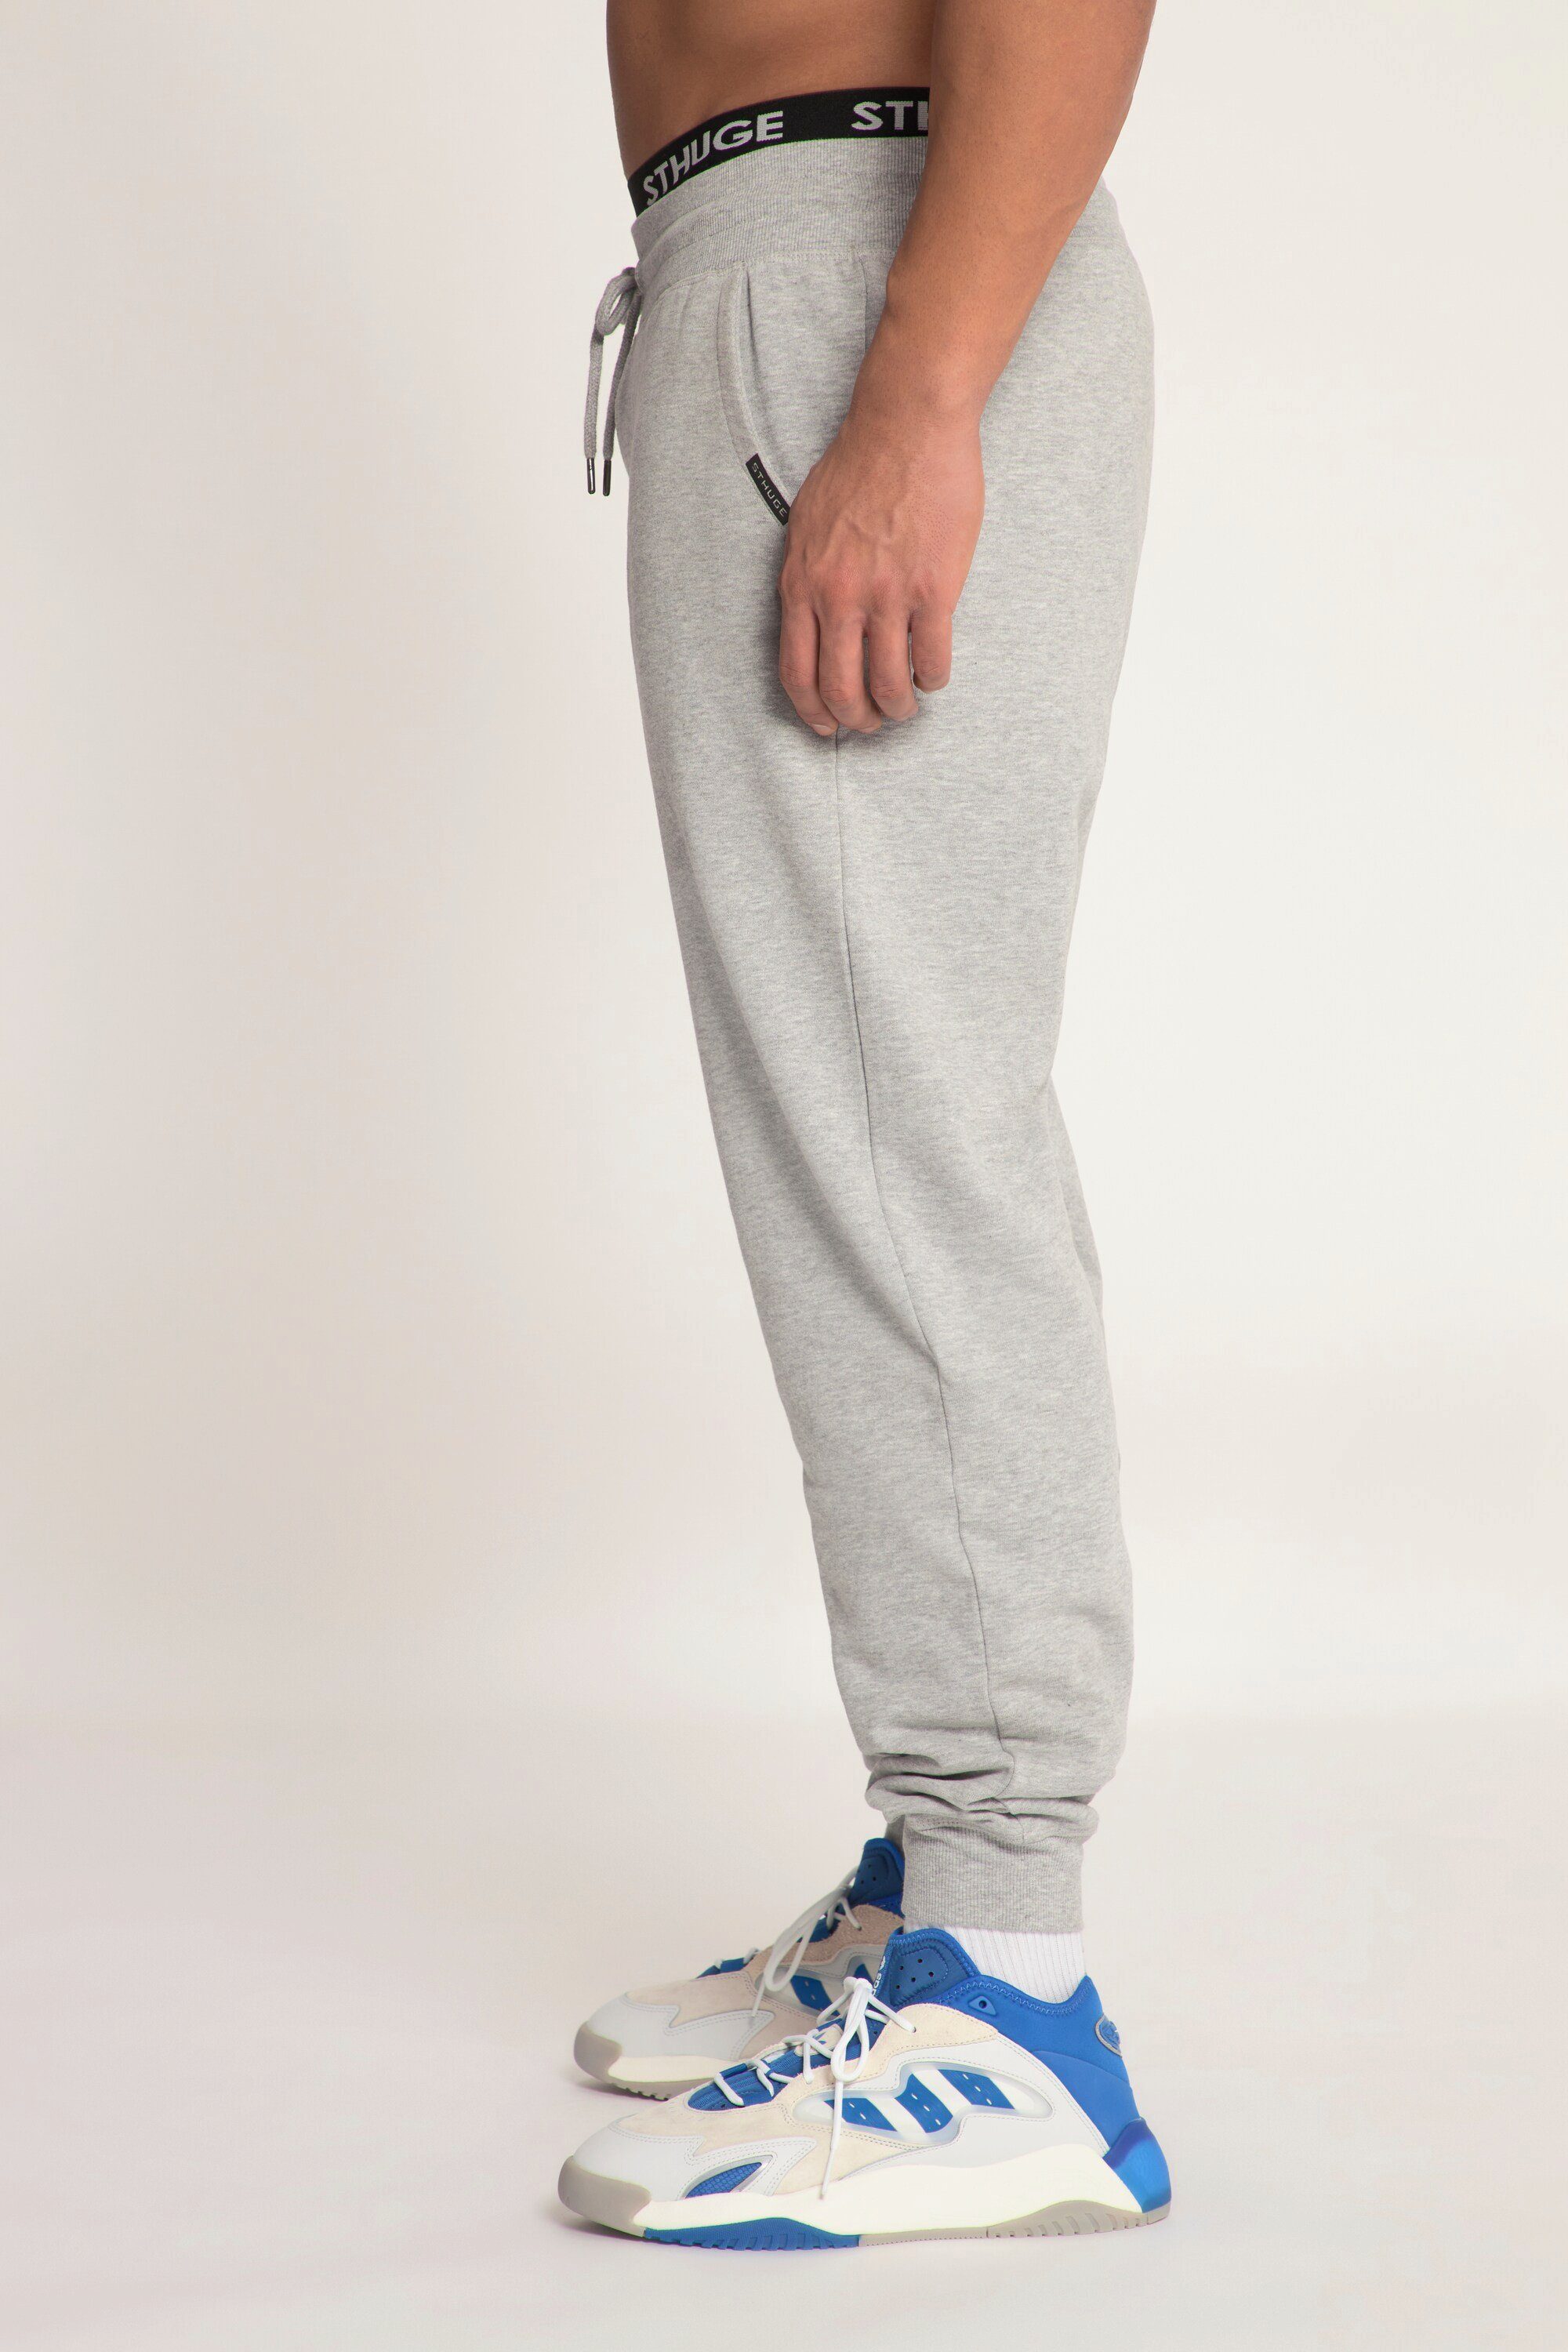 Taschen STHUGE Sweathose Fit Jogginghose STHUGE Relaxed mit